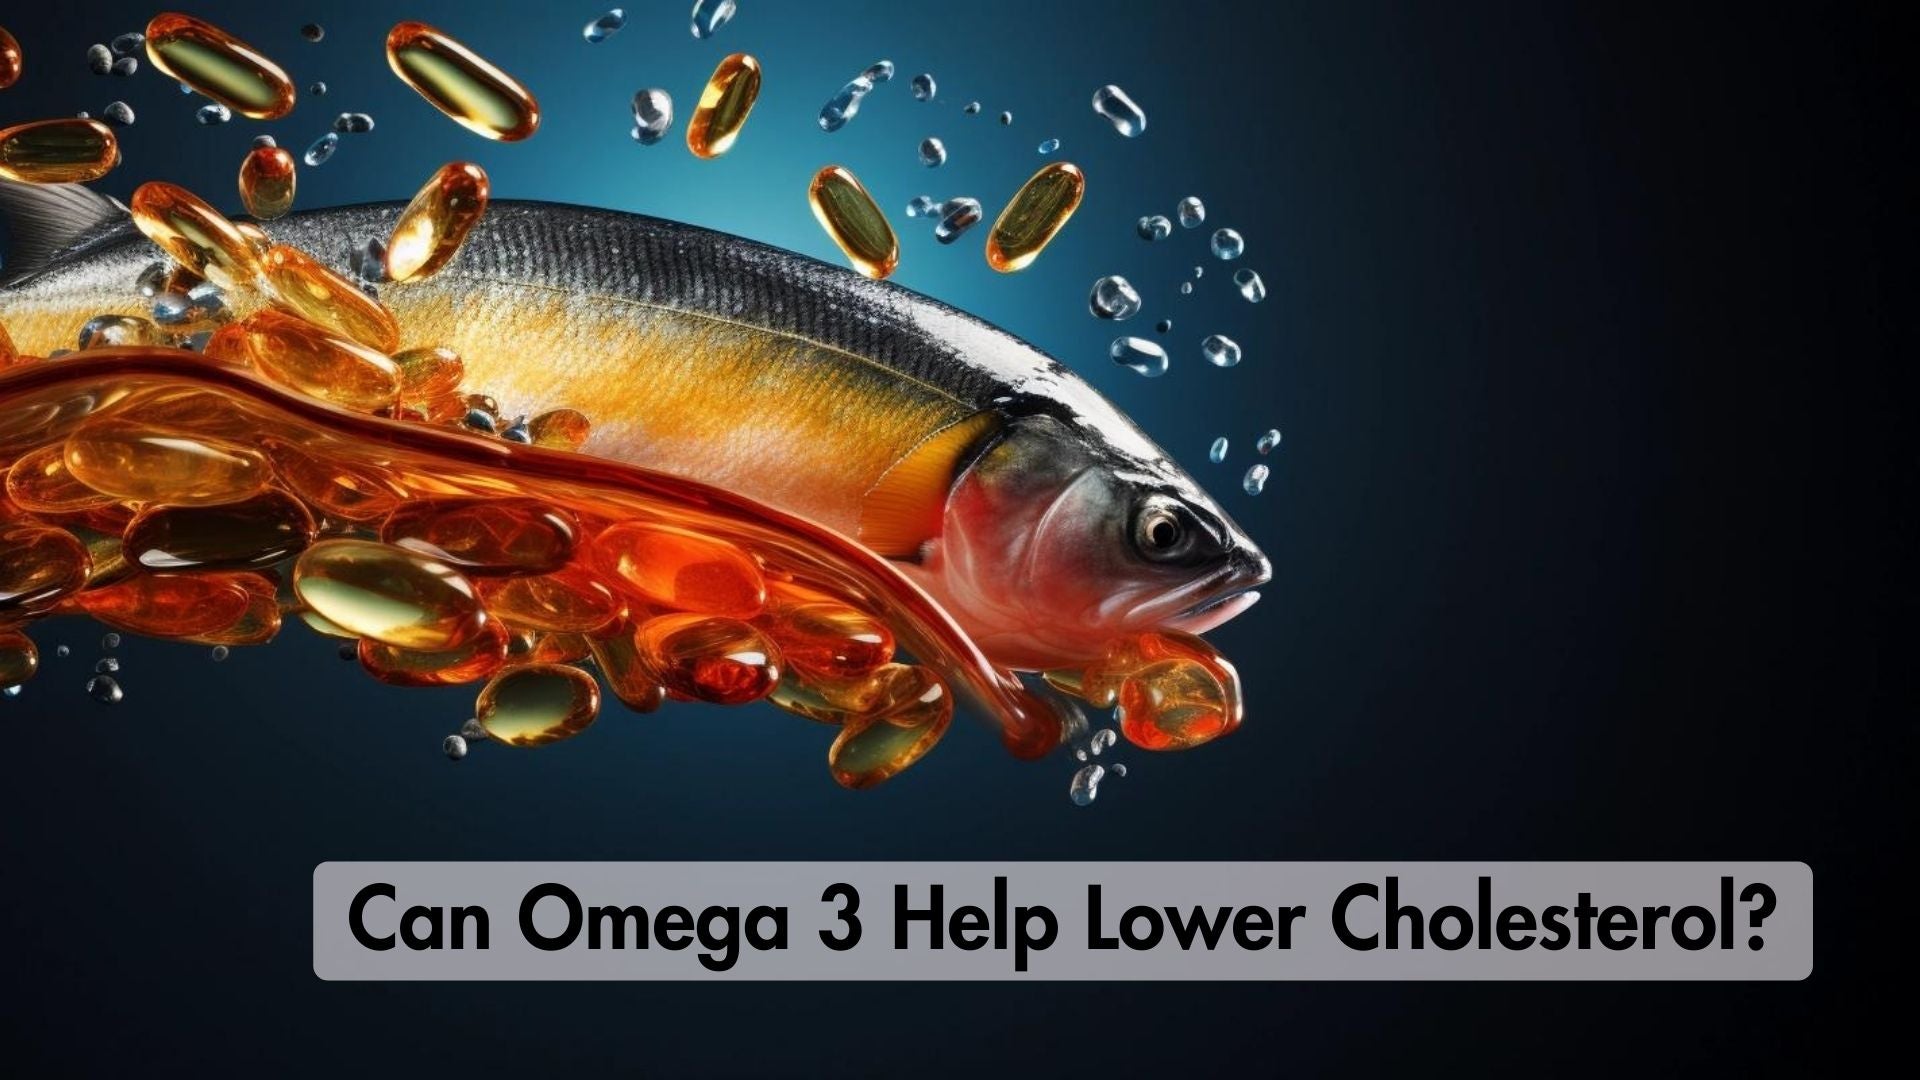 Can Omega 3 Lower Cholesterol